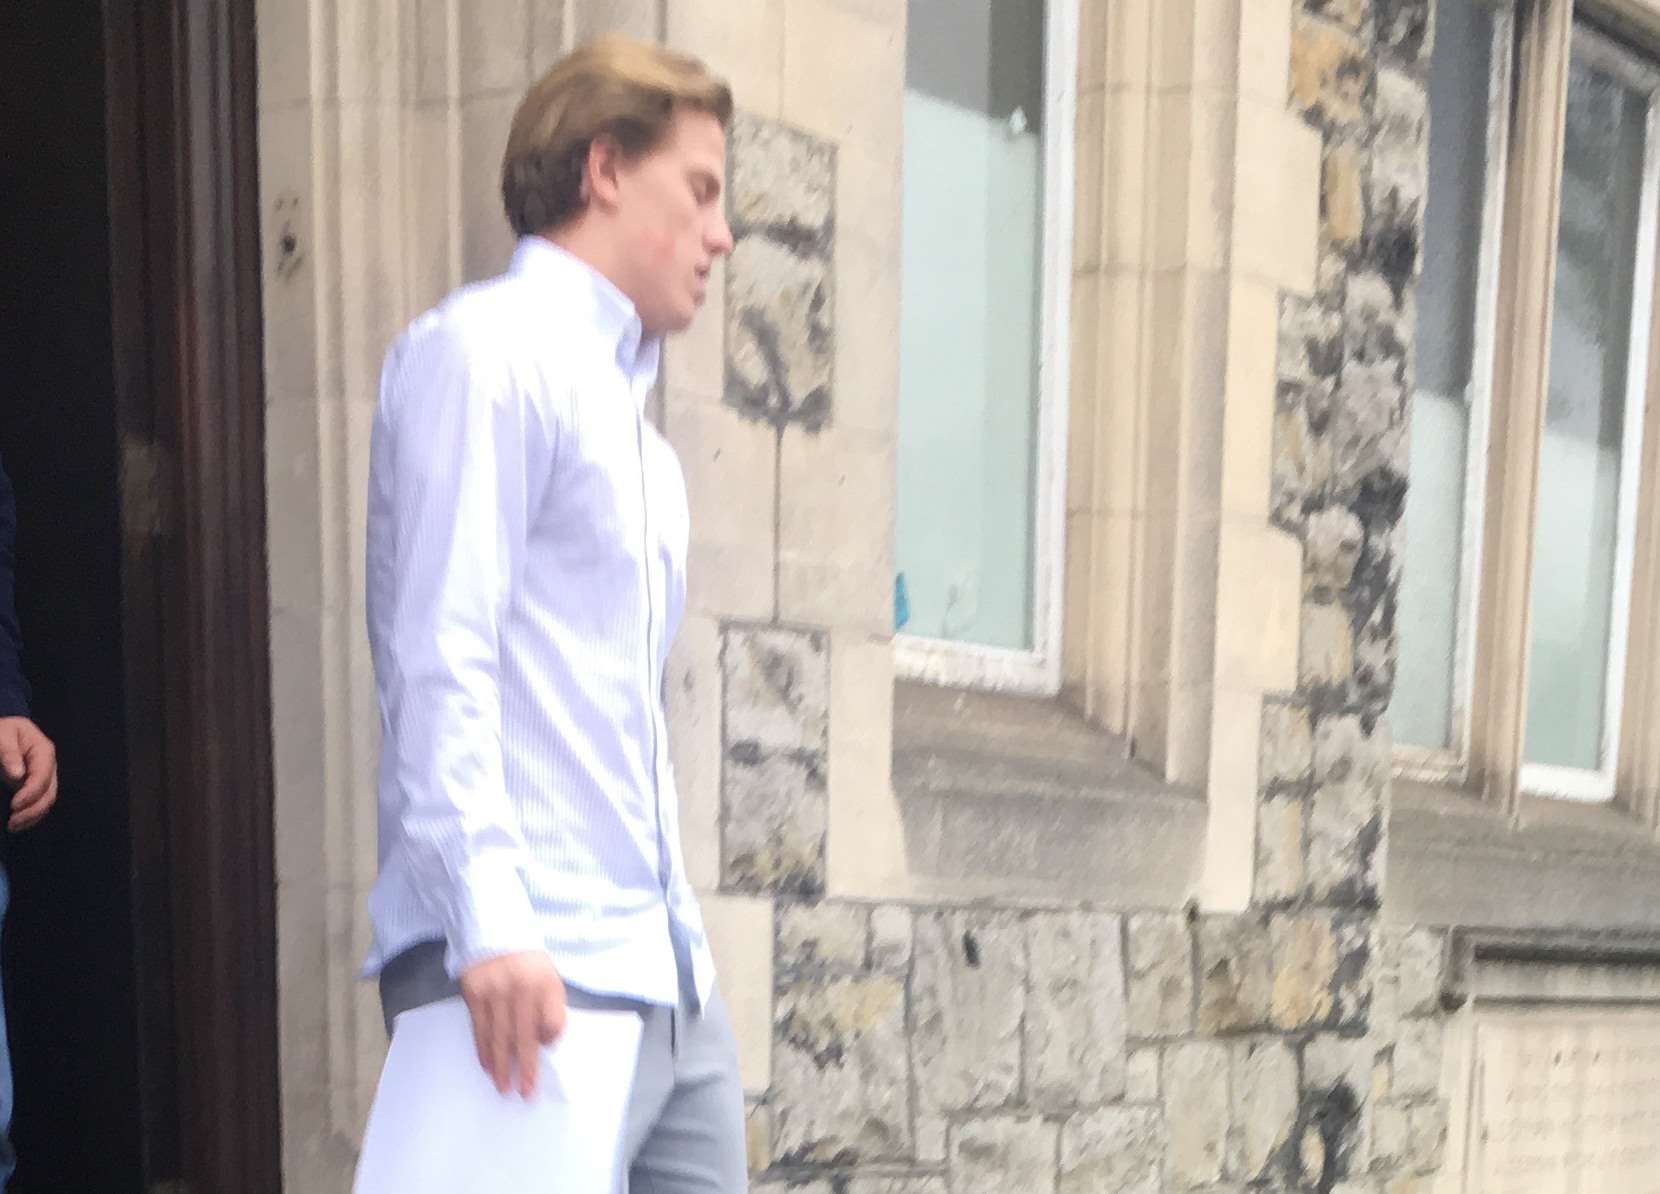 Alfie Davey leaves Maidstone Magistrates' Court